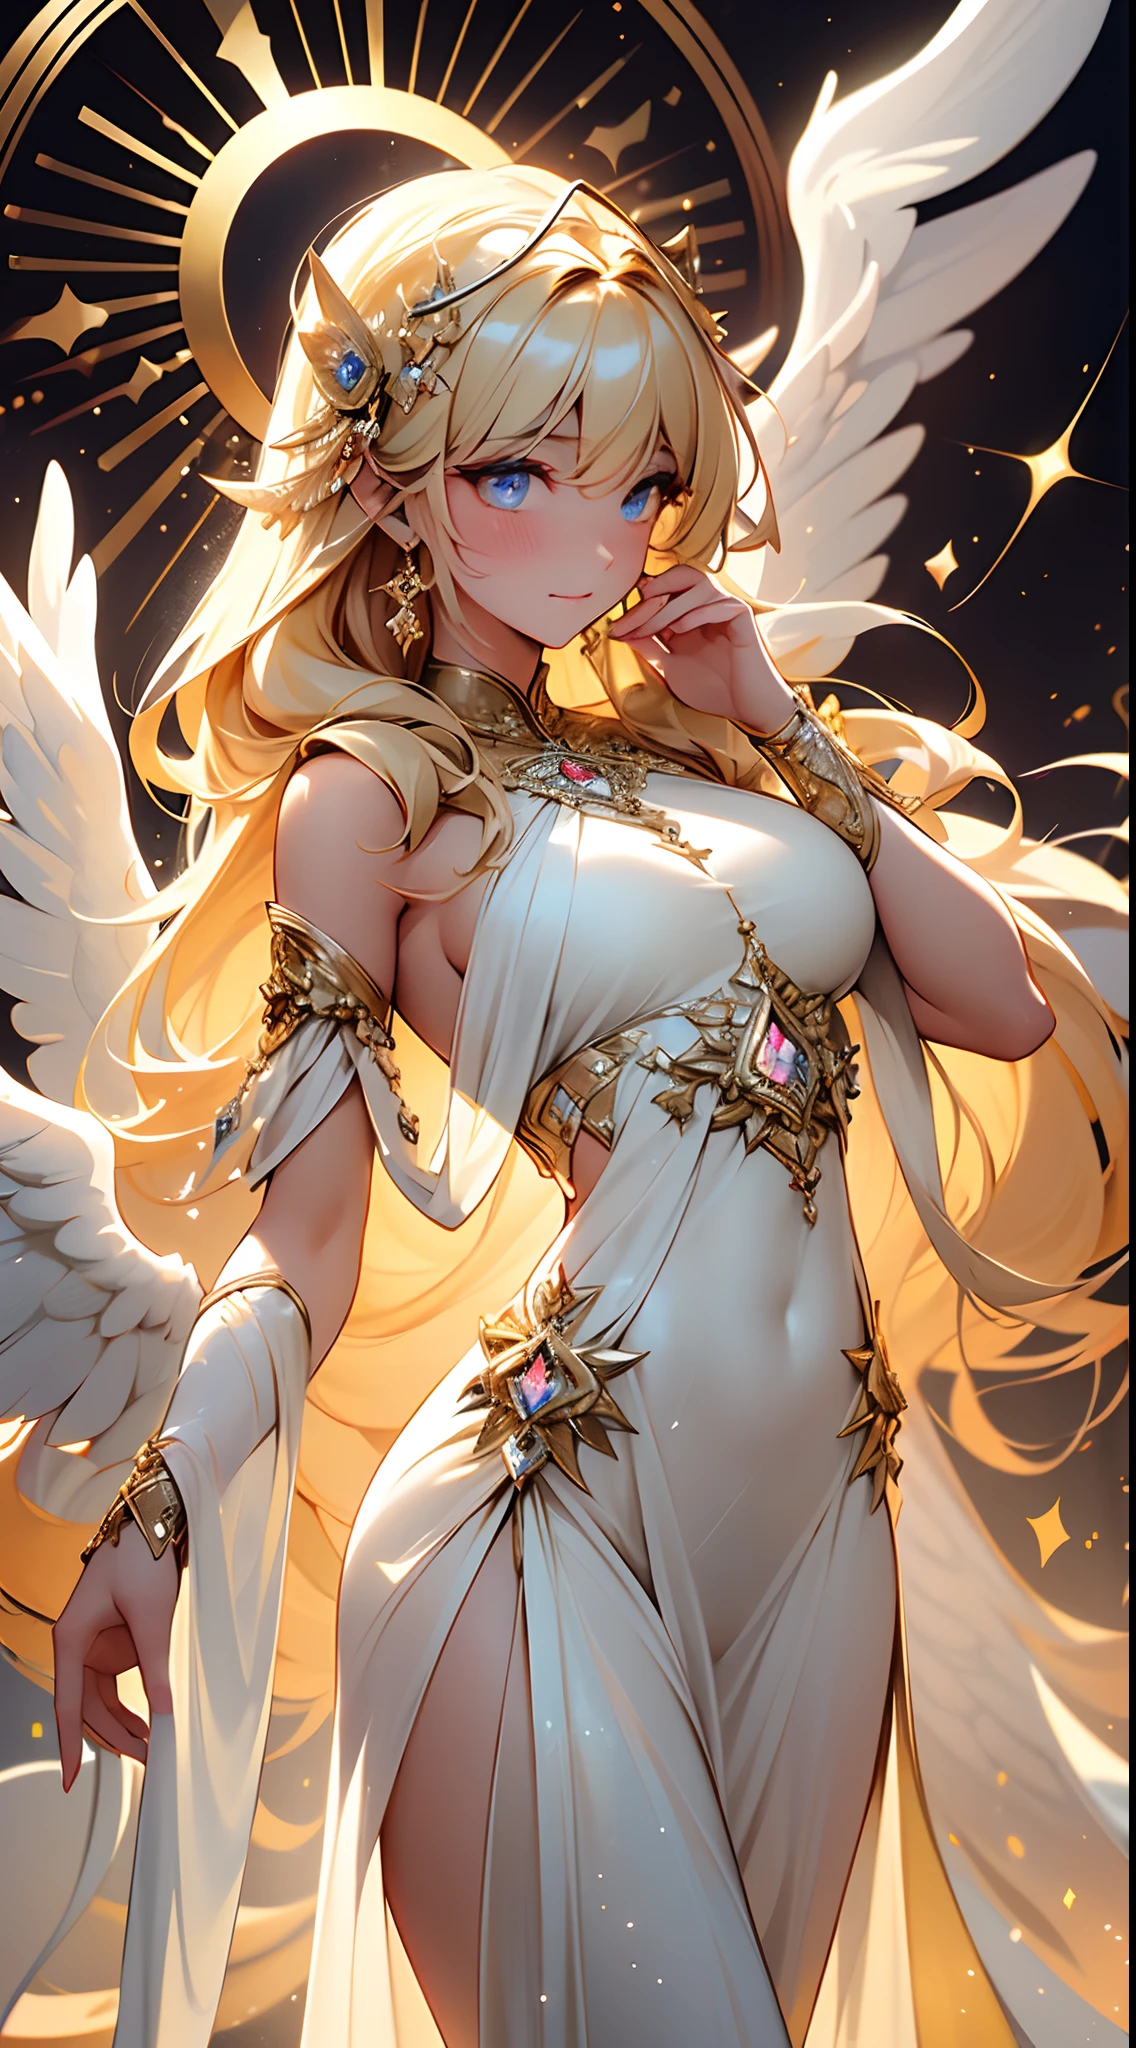 (highres,best quality:1.2),dreamy angels, angels, angels with white halo and wings, dreamy, celestial beings,divine silence,stunning presence, heavenly background,transcendent beauty,divine grace,celestial harmony,cosmic radiance,heavenly glow,mystical aura,luminous atmosphere,serene tranquility,divine power,majestic elegance,sacred energy,cosmic alignment,celestial connection,spiritual transcendence,ethereal light,angelic figures,transcendent realm,celestial artistry,cosmic enchantment,stellar luminescence,heavenly attire,transcendent serenity,celestial radiance,cosmic magic,stunning ethereal beings,lustrous cosmic tapestry,heavenly spectacle,divine countenance,supernatural grace,cosmic vibrations,celestial transcendence,empyrean beauty